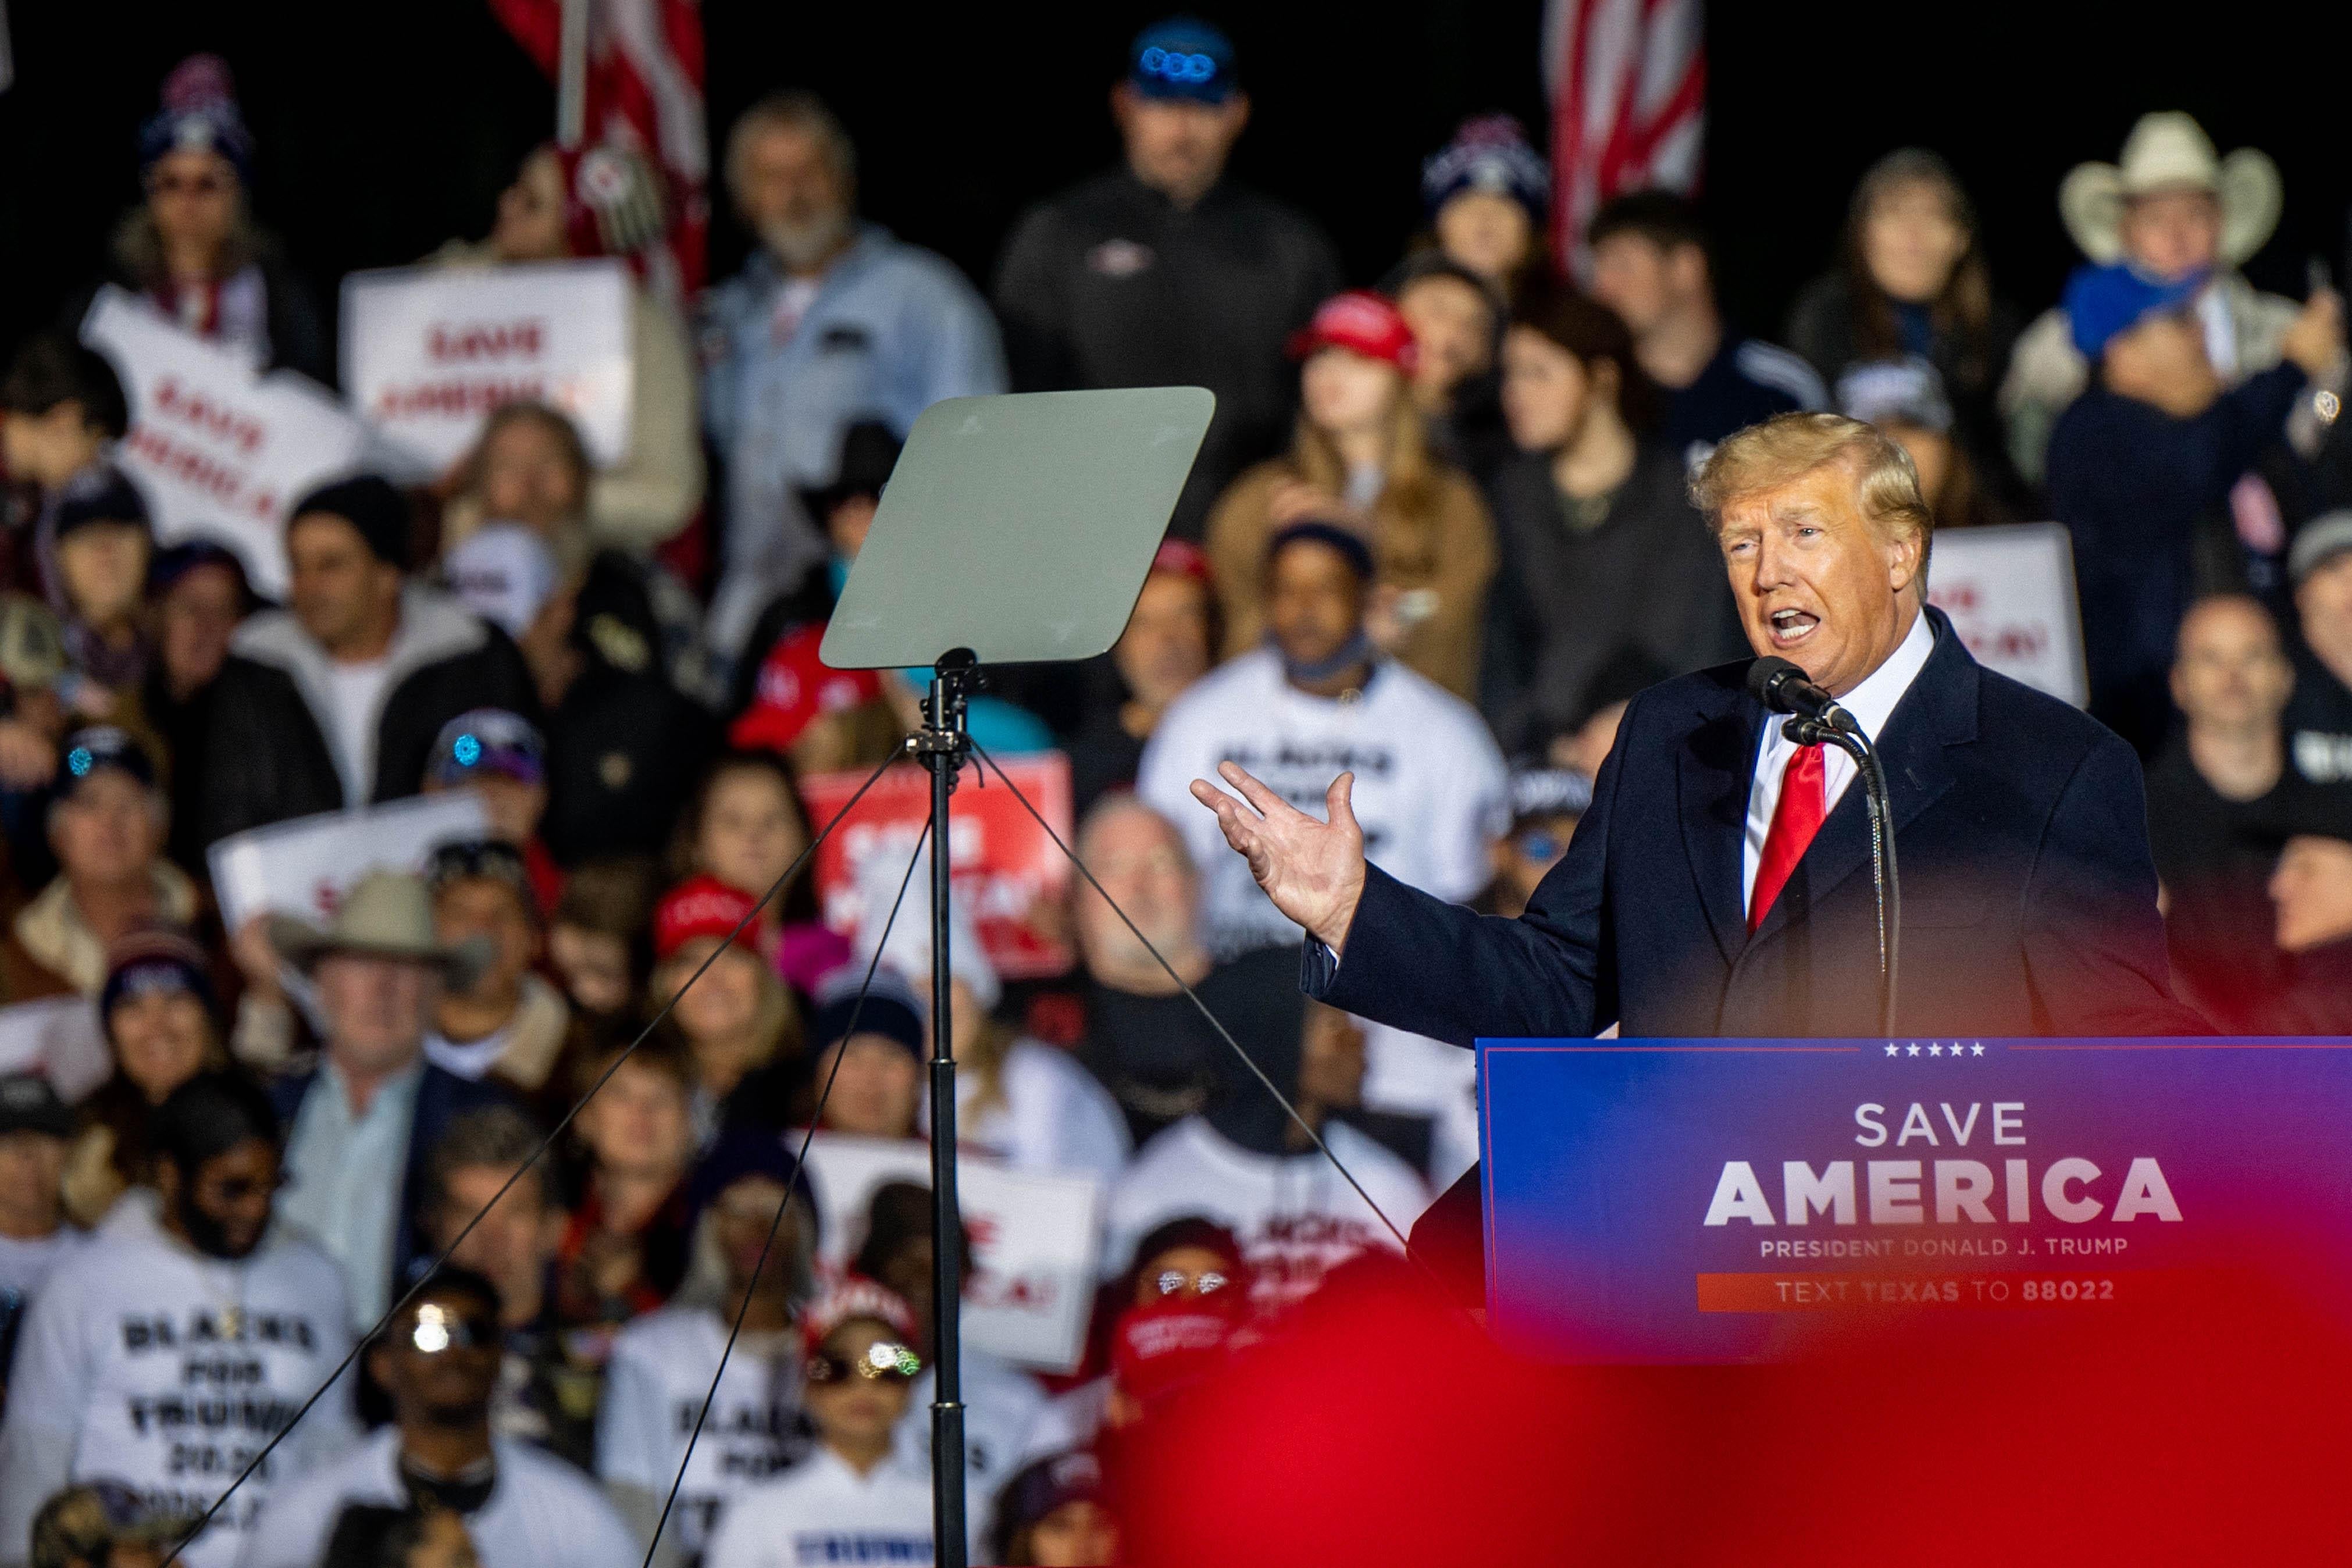 Former President Donald Trump speaks during a rally at the Montgomery County Fairgrounds on January 29, 2022 in Conroe, Texas.